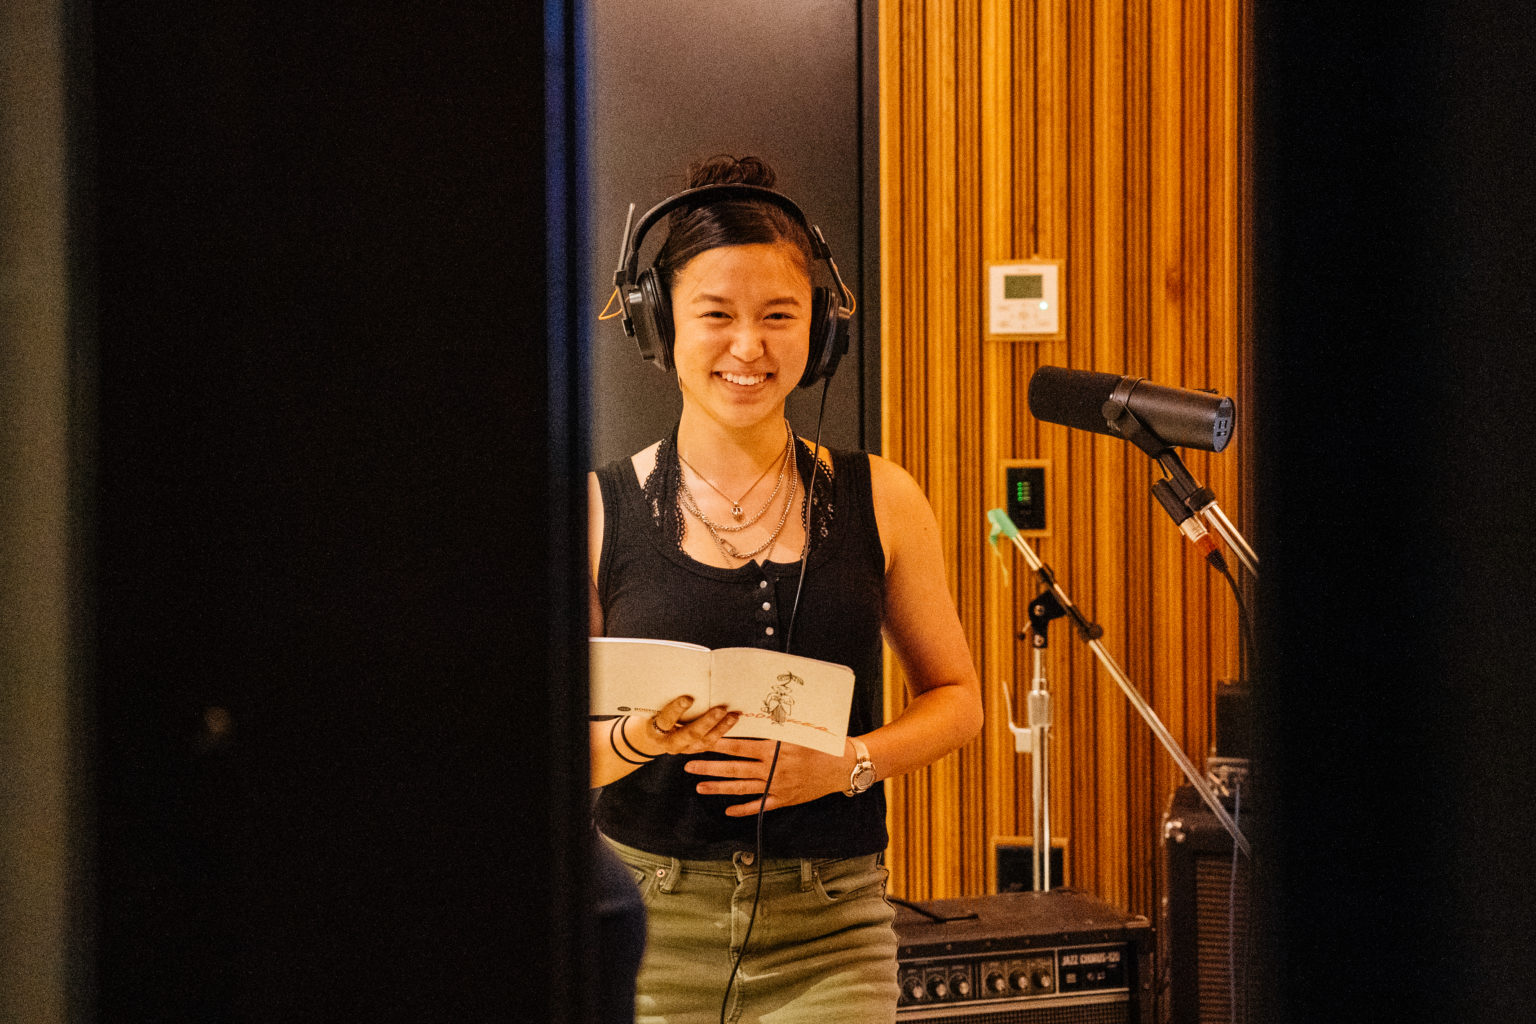 Student with headphones on standing in recording booth